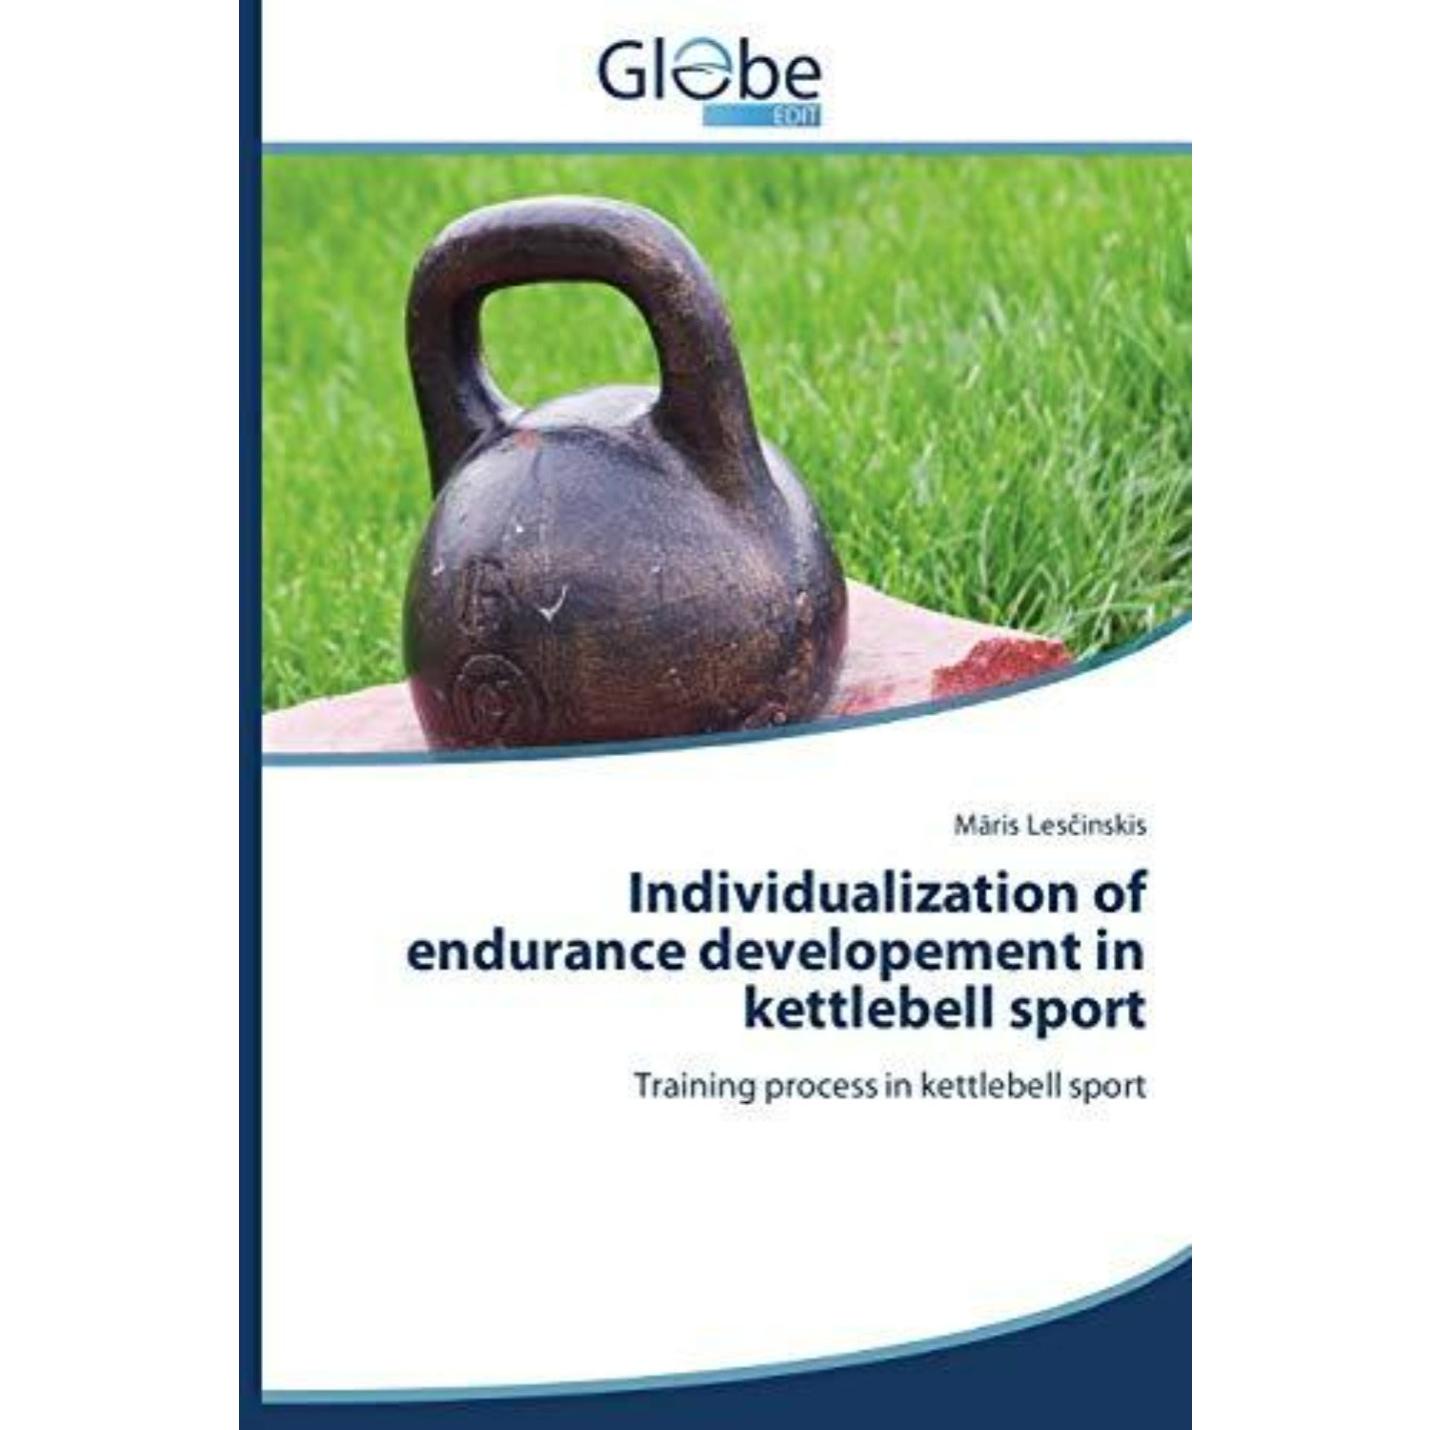 Individualization of endurance developement in kettlebell sport: Training process in kettlebell sport - happygetfit.com